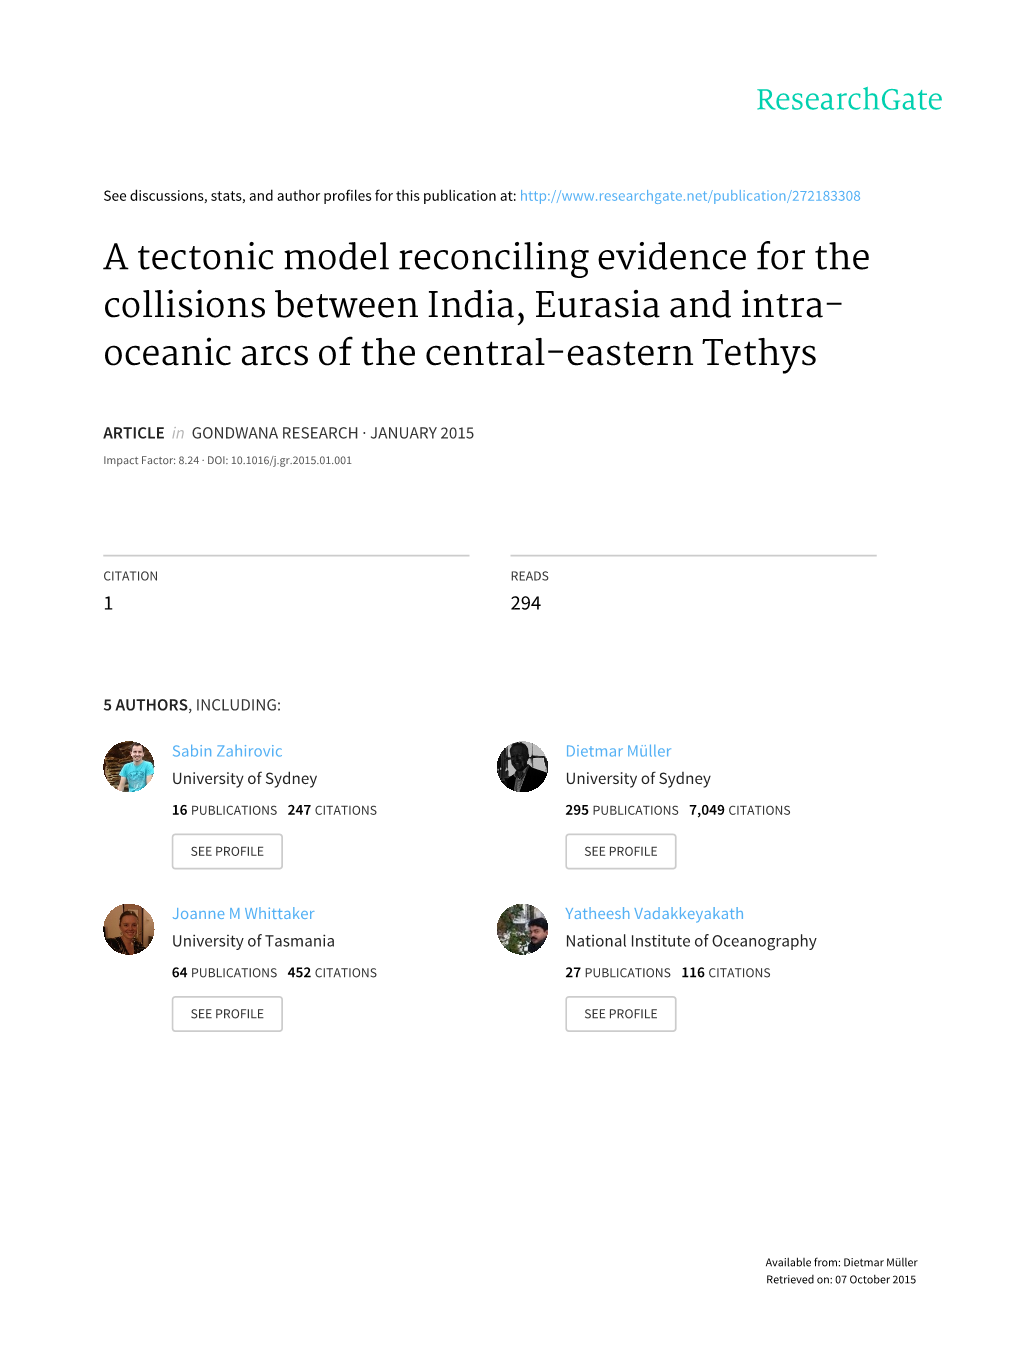 A Tectonic Model Reconciling Evidence for the Collisions Between India, Eurasia and Intra- Oceanic Arcs of the Central-Eastern Tethys